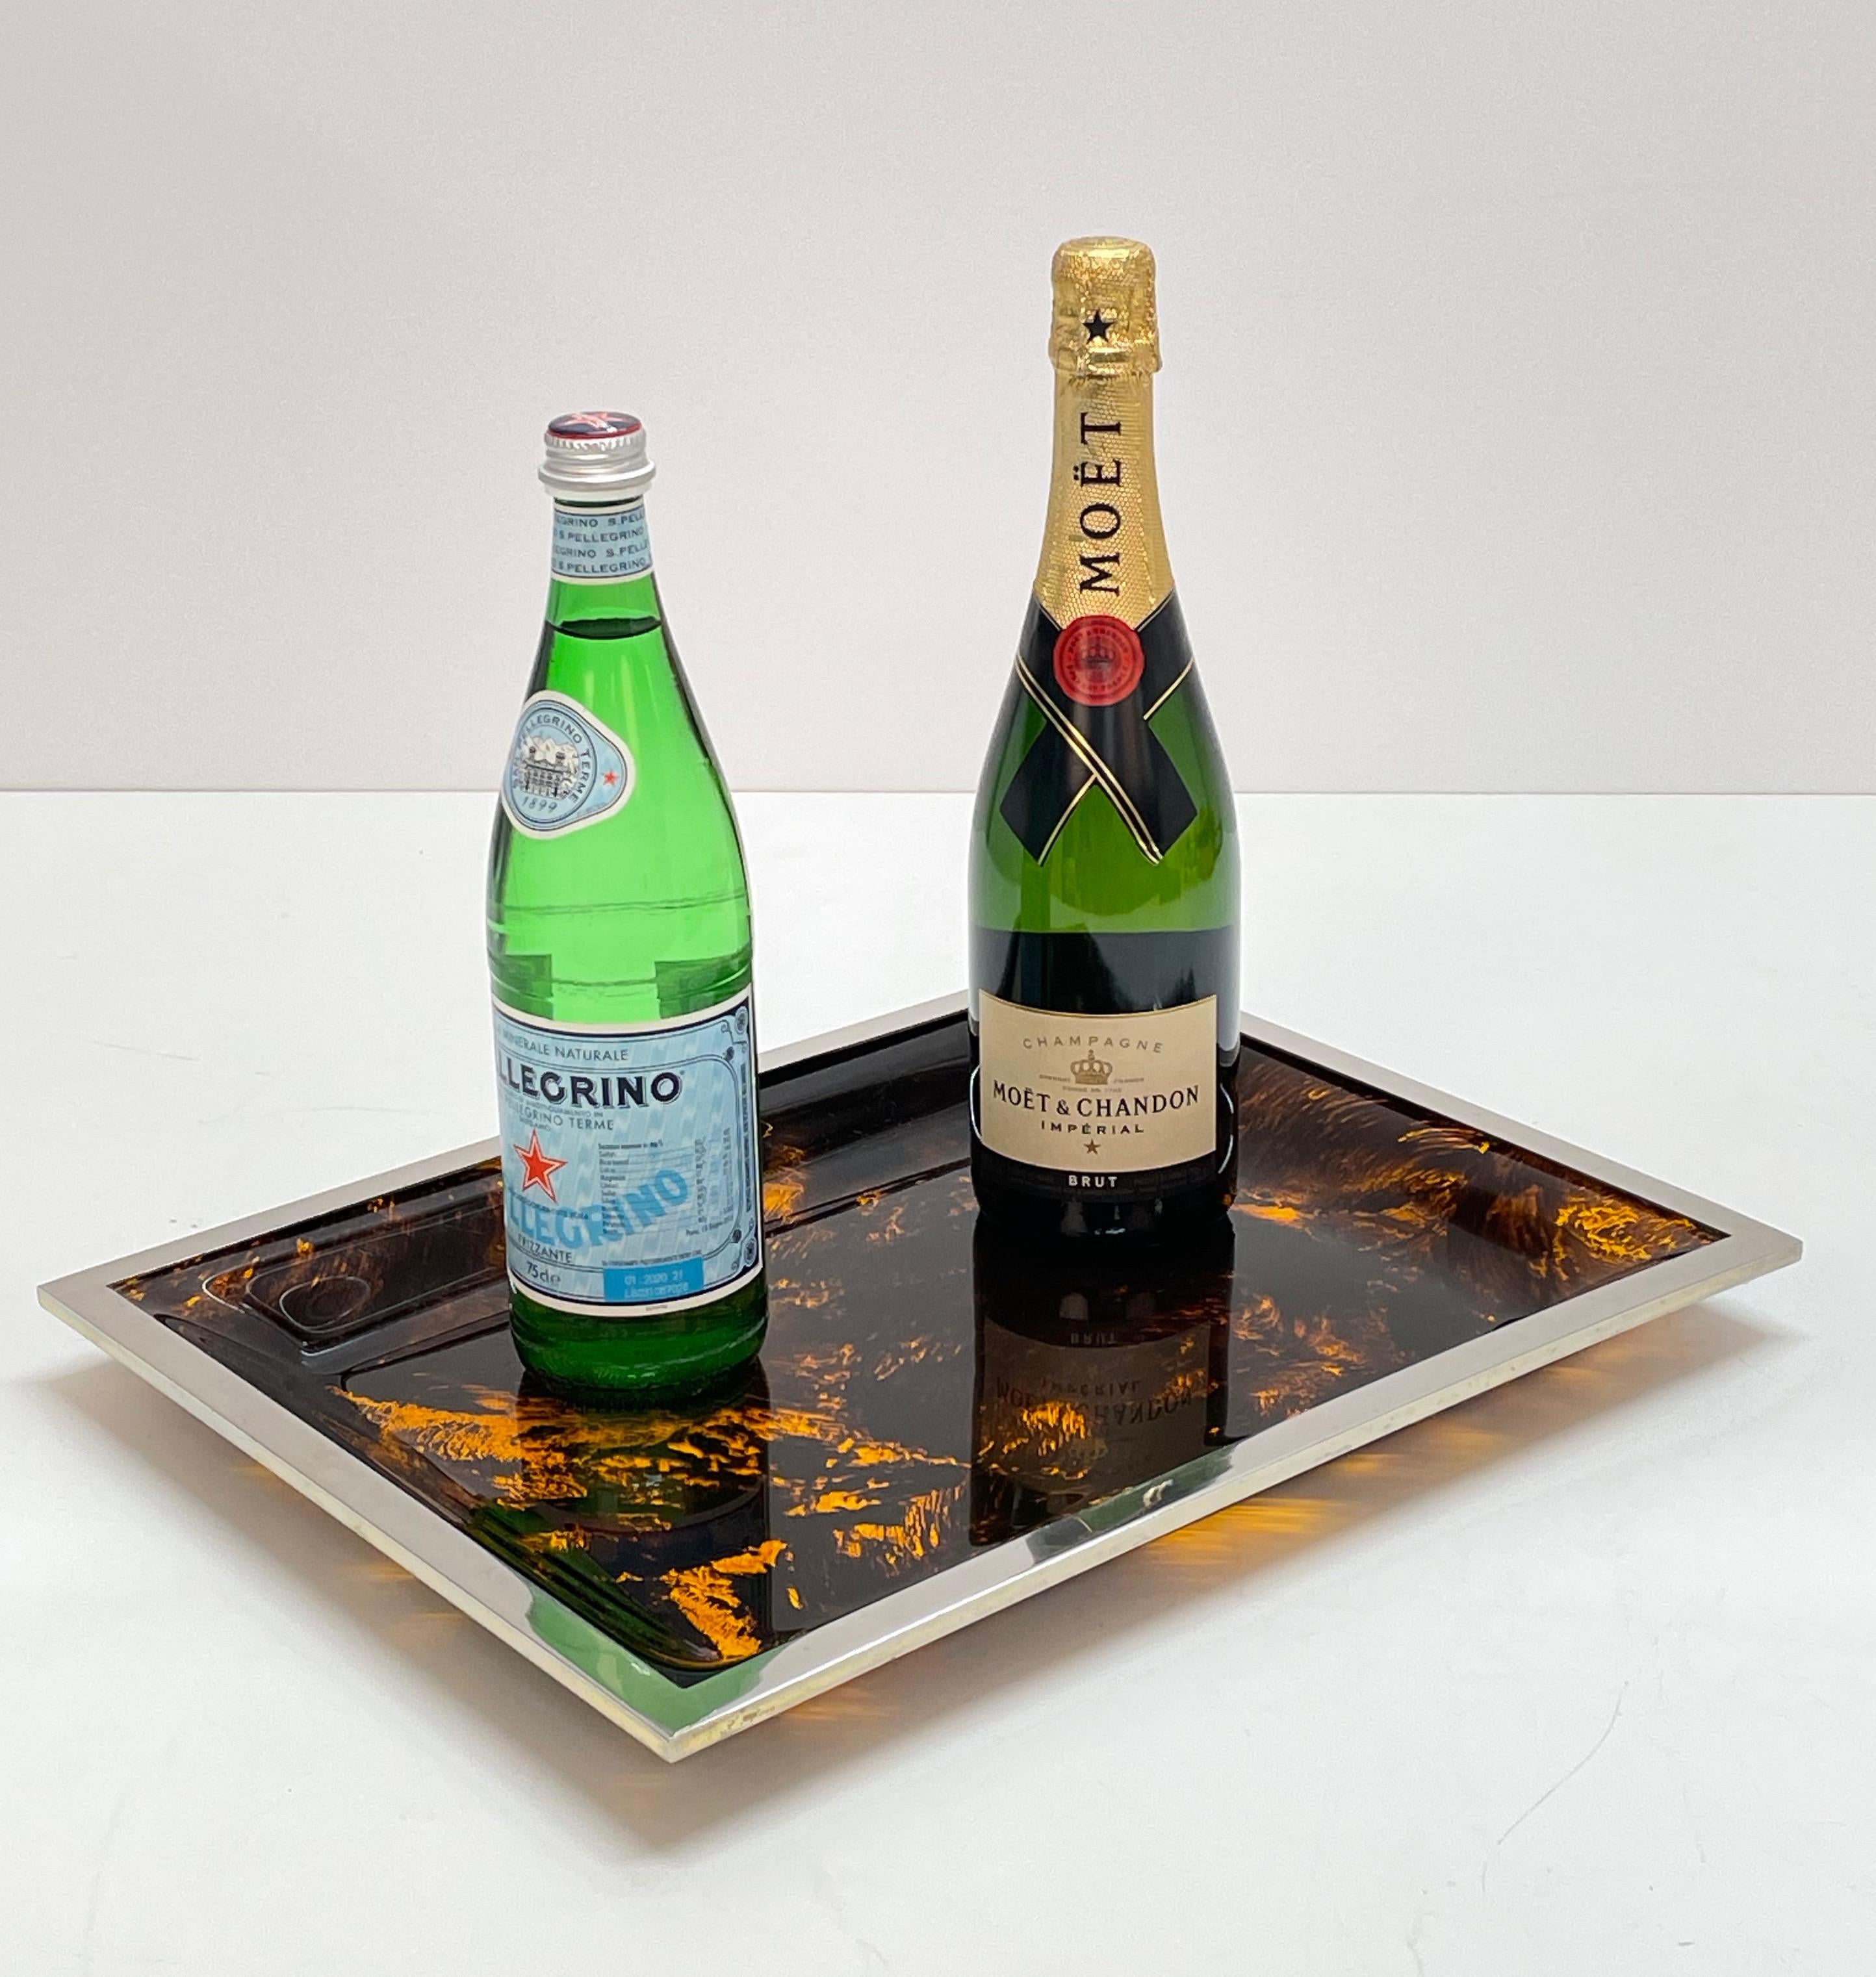 Midcentury Tortoiseshell Plexiglass Italian Serving Tray after Willy Rizzo 1970s For Sale 2